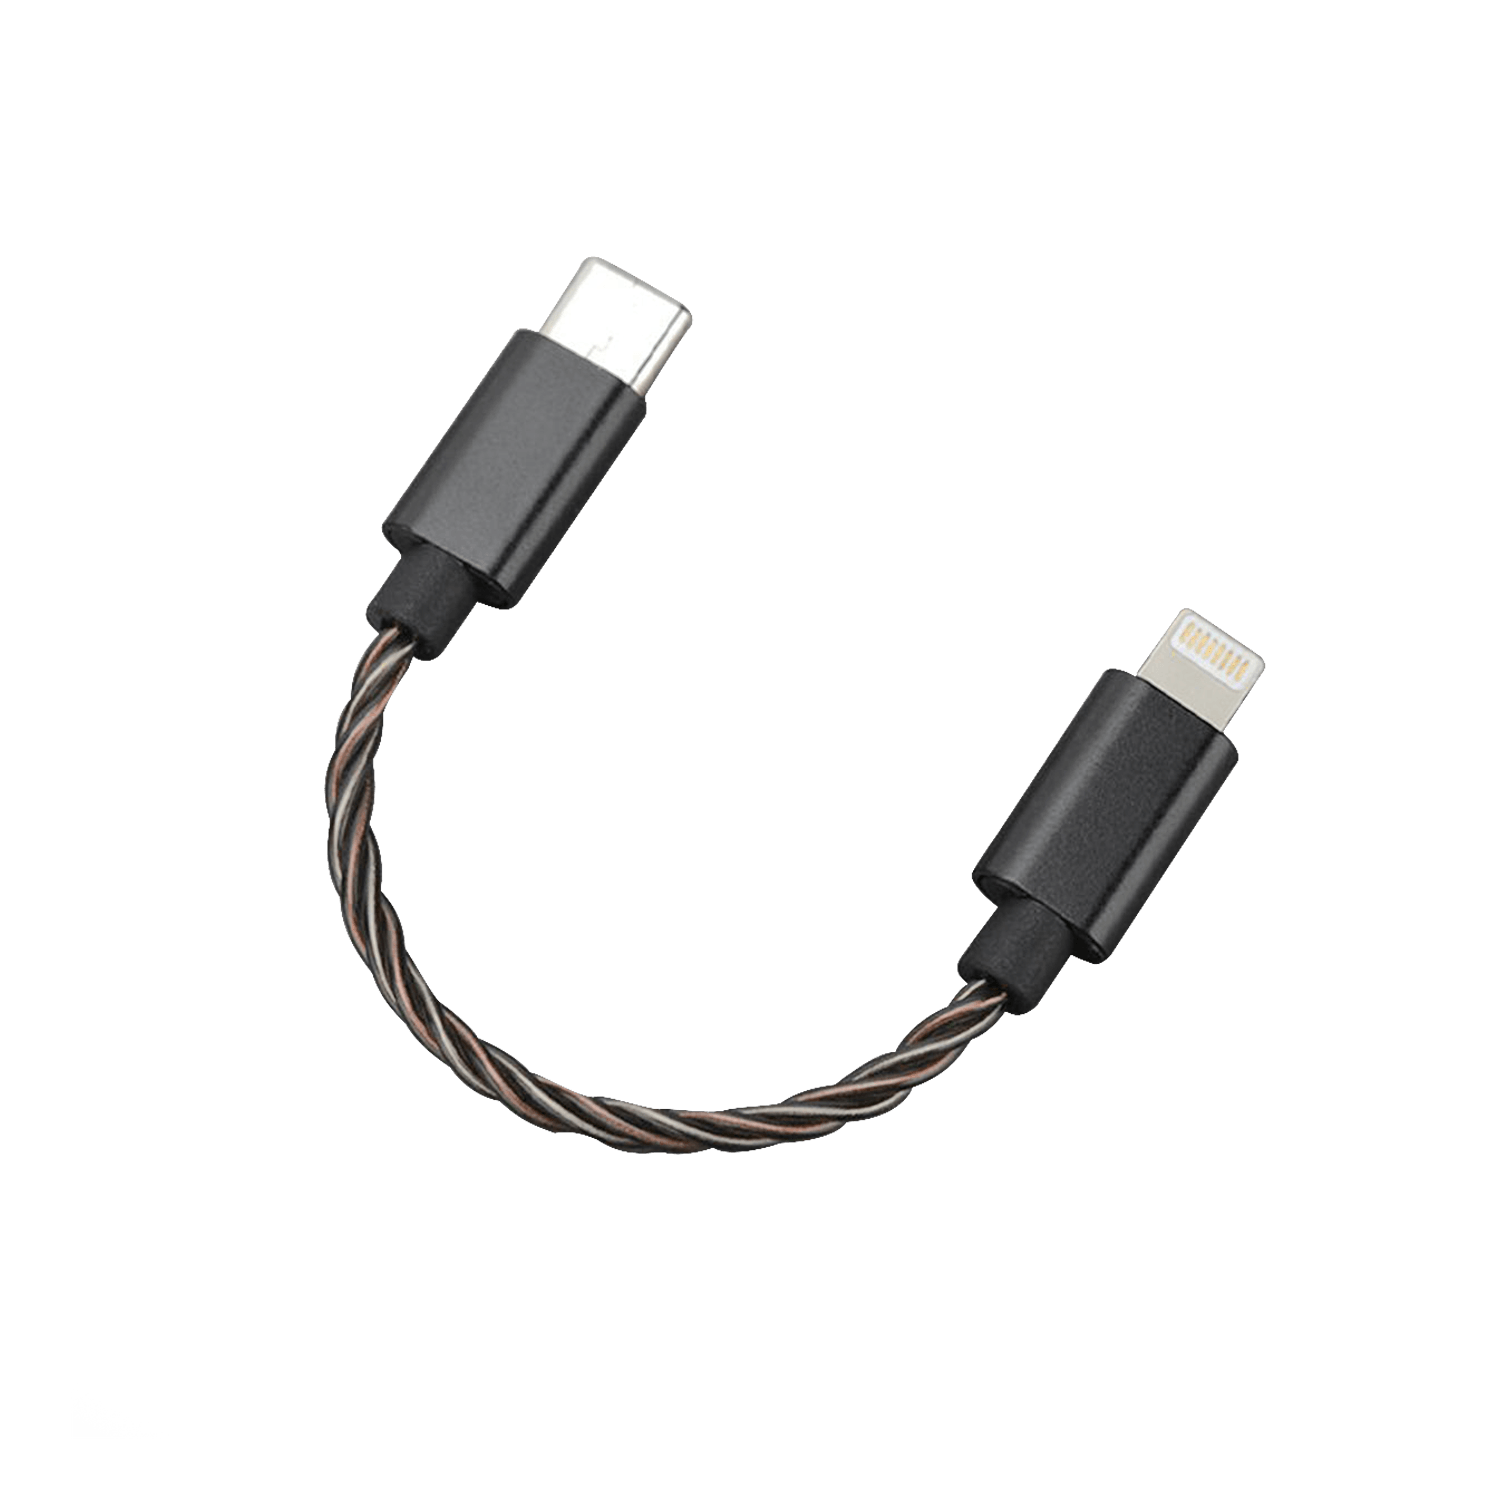 Hidizs LT02 USB-C to Lightning Cable